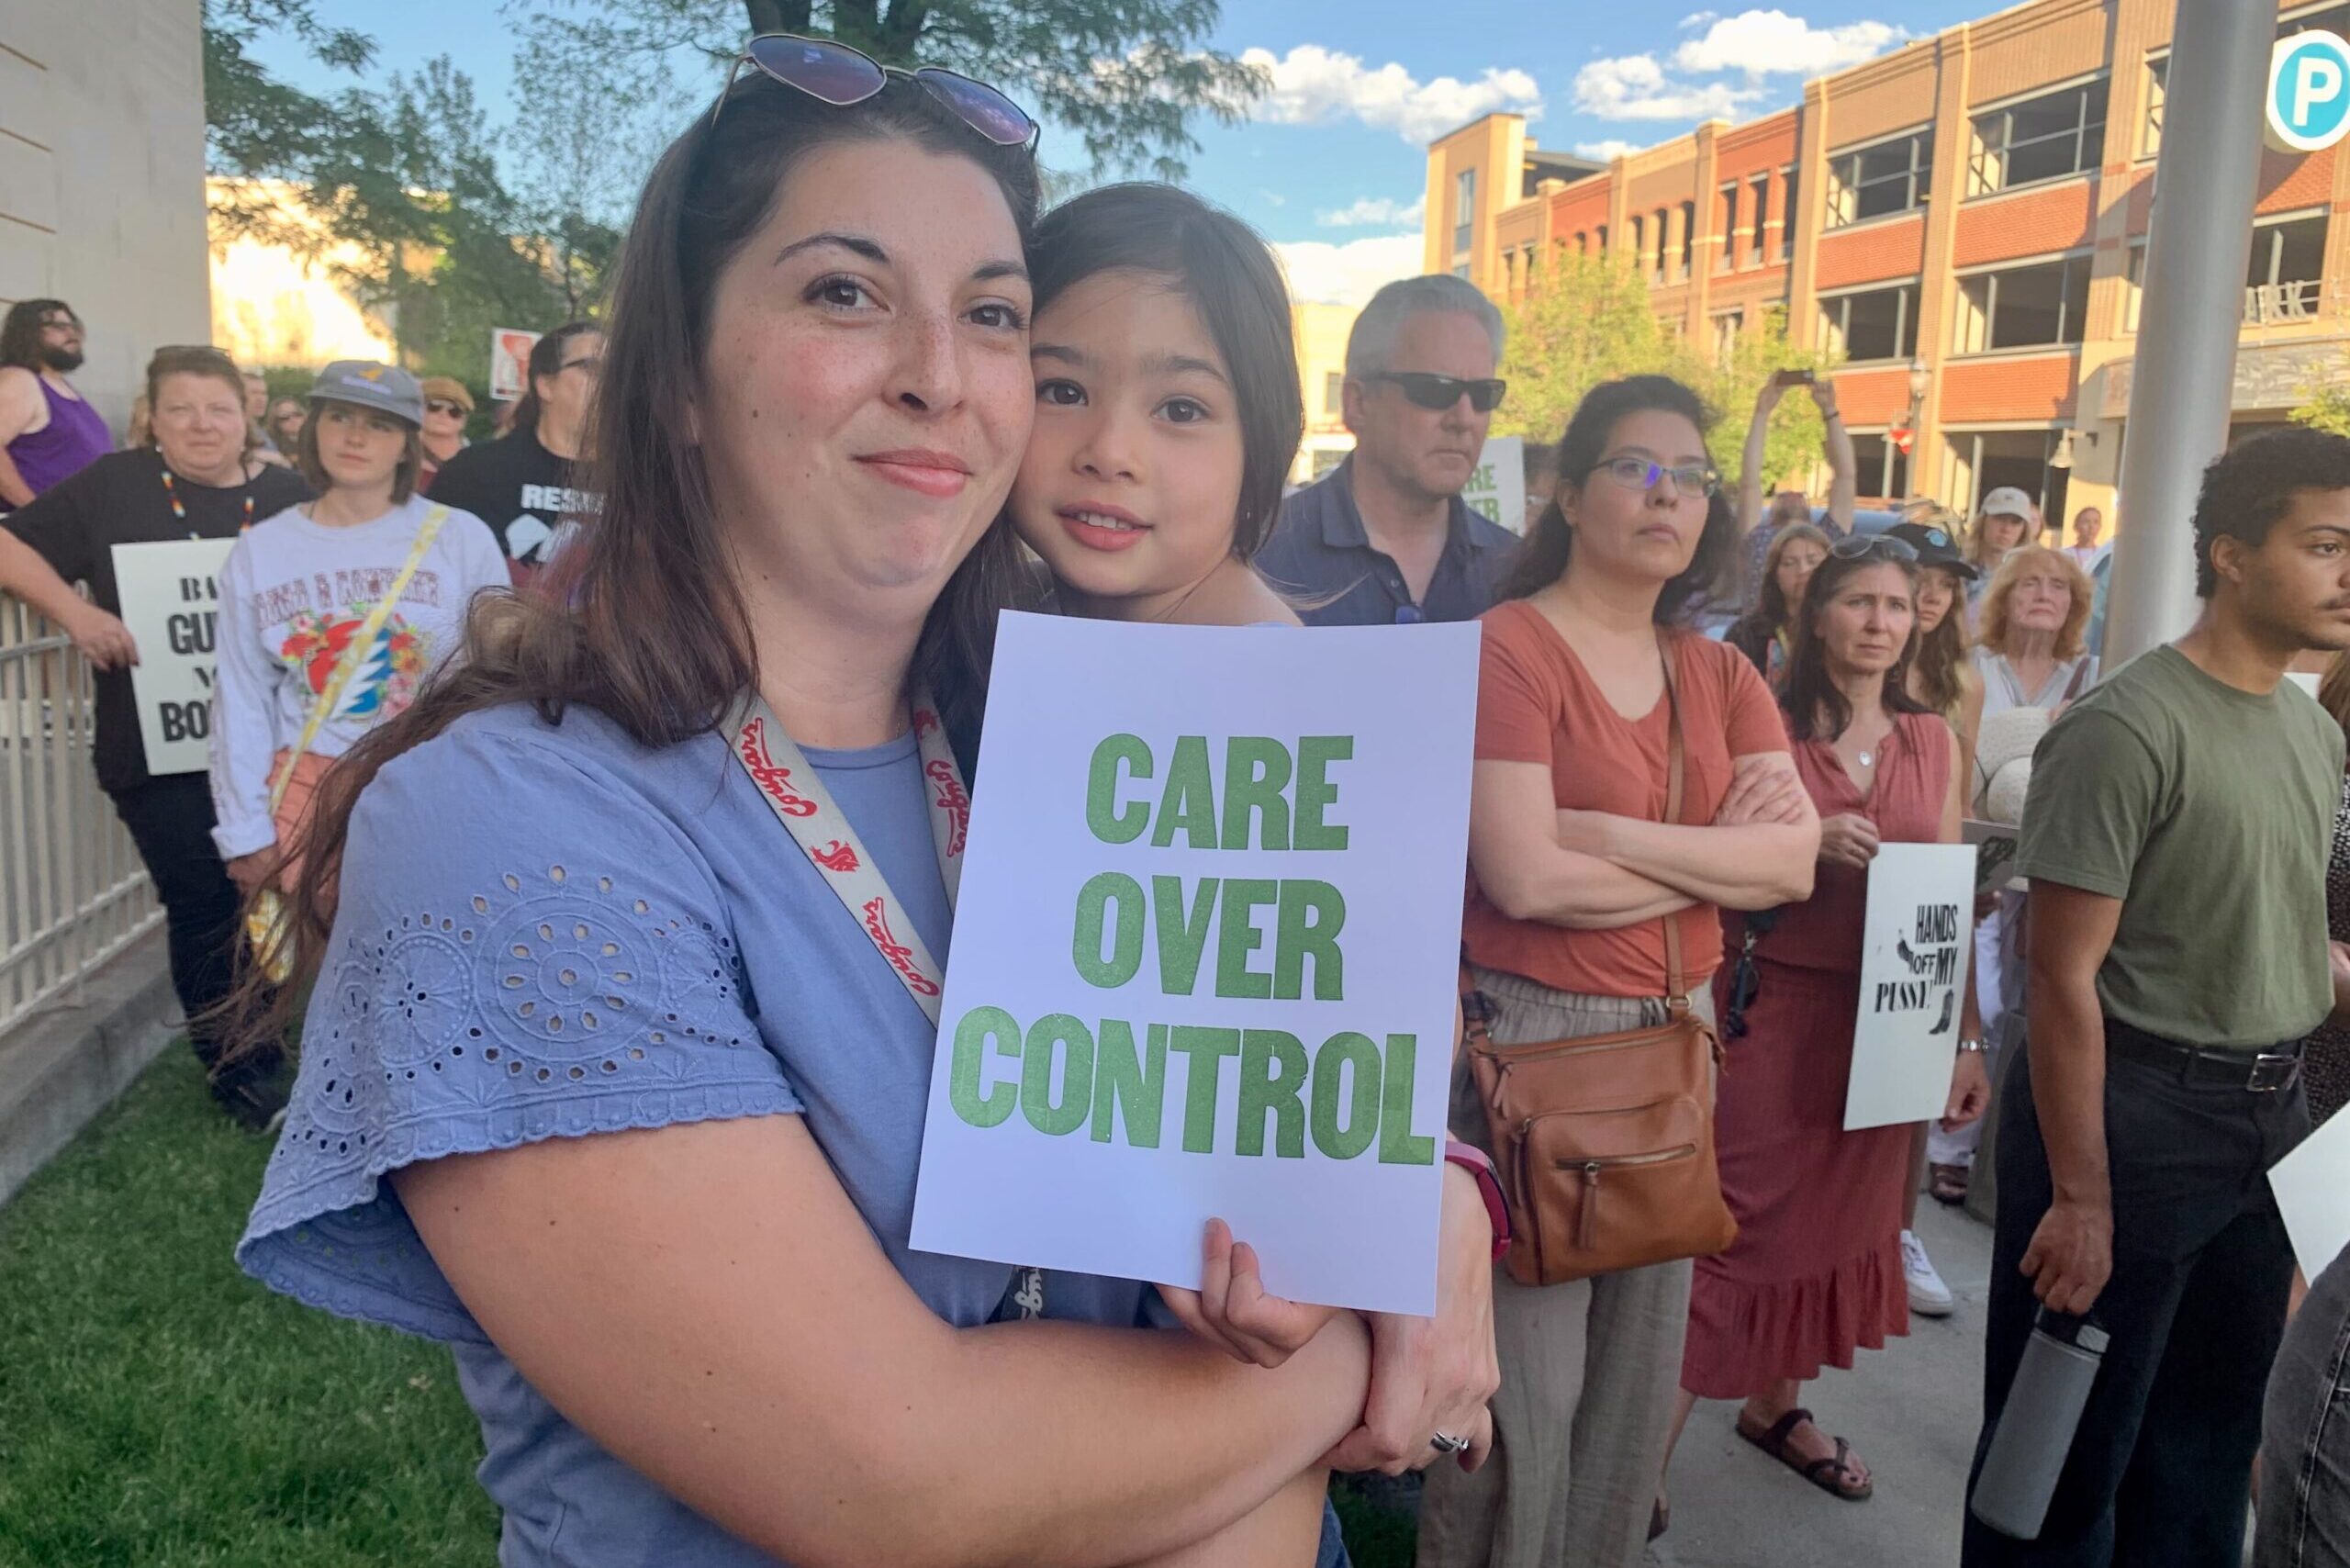 A large crowd gathered outside the federal courthouse in Grand Junction on Friday, June 24, 2022 to protest the overturning of Roe vs. Wade by the U.S. Supreme Court made earlier in the day.